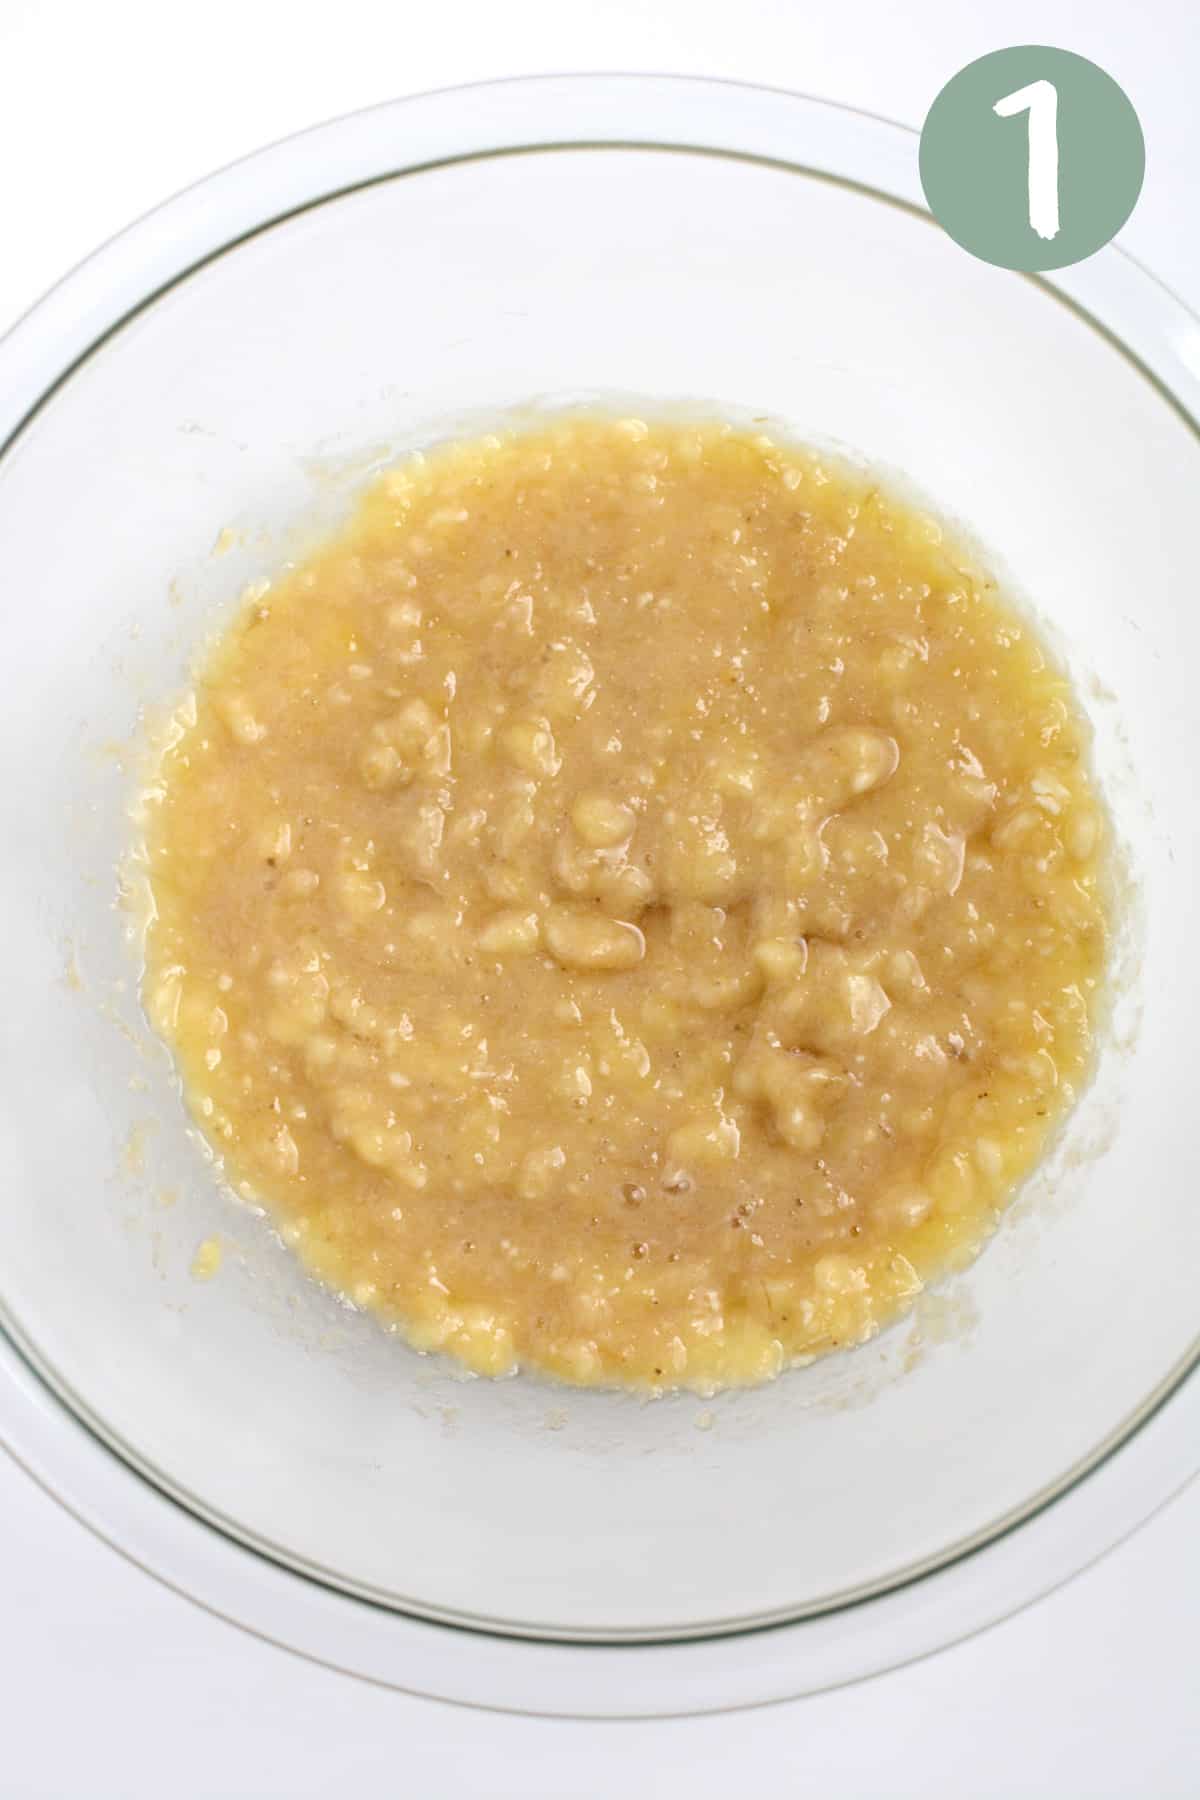 Mashed bananas and oil mixed in a glass bowl.